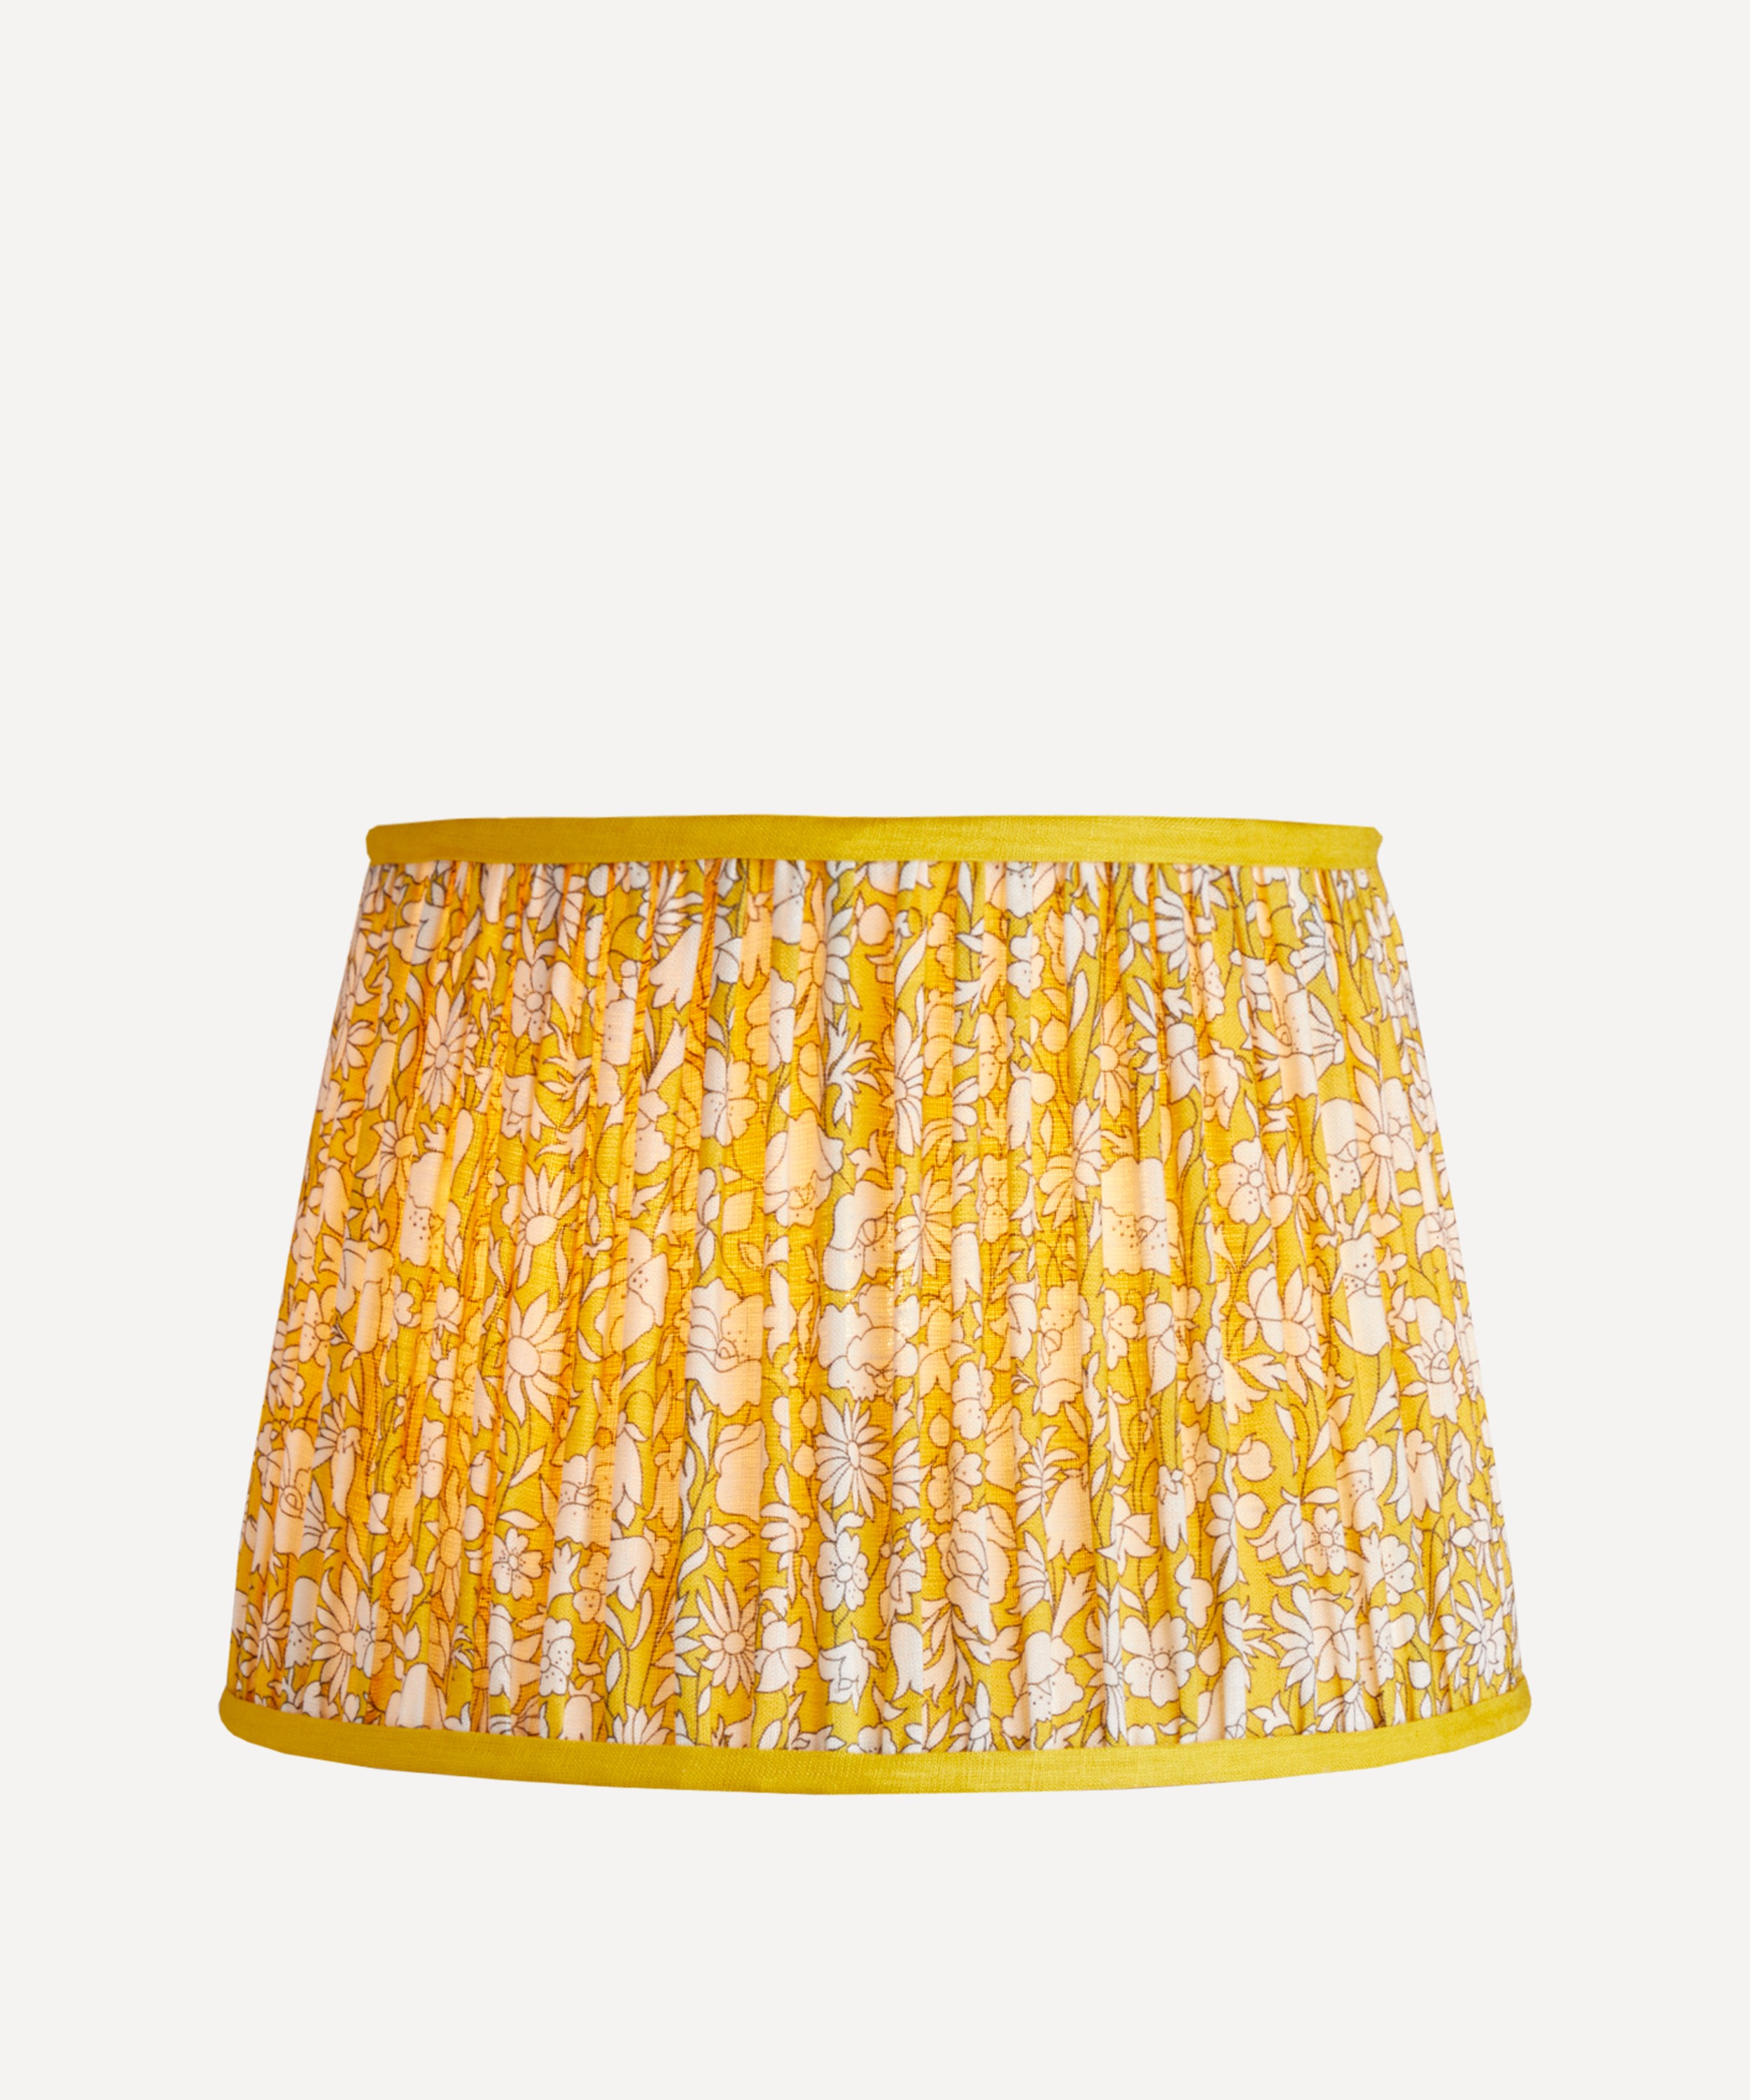 Pooky - Poppy Meadow Straight Empire Gathered Lampshade image number 3